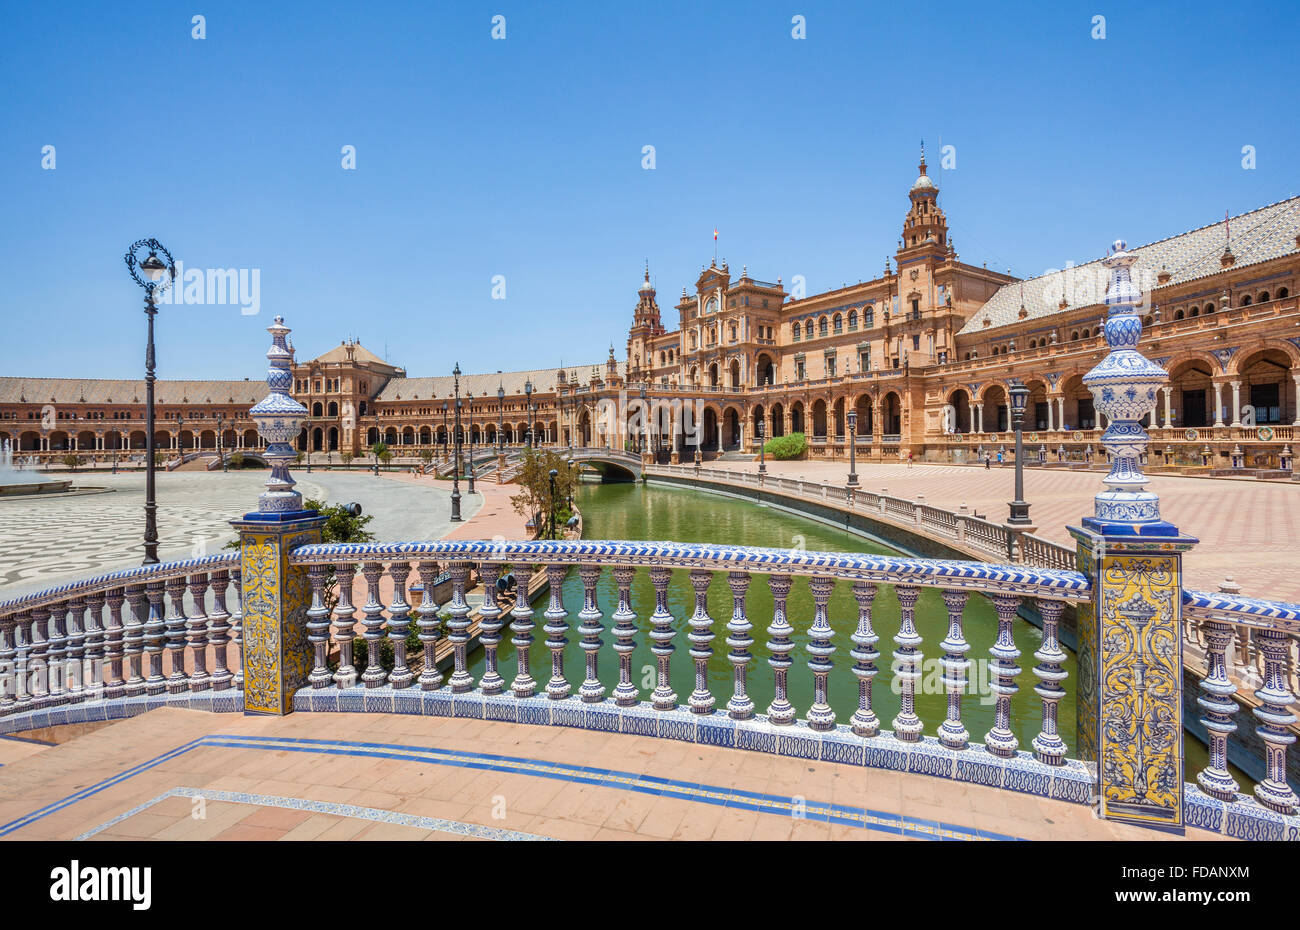 Spain, Andalusia, Province of Seville, Seville, Plaza de Espana, view of the moat and bridges and the central building Stock Photo